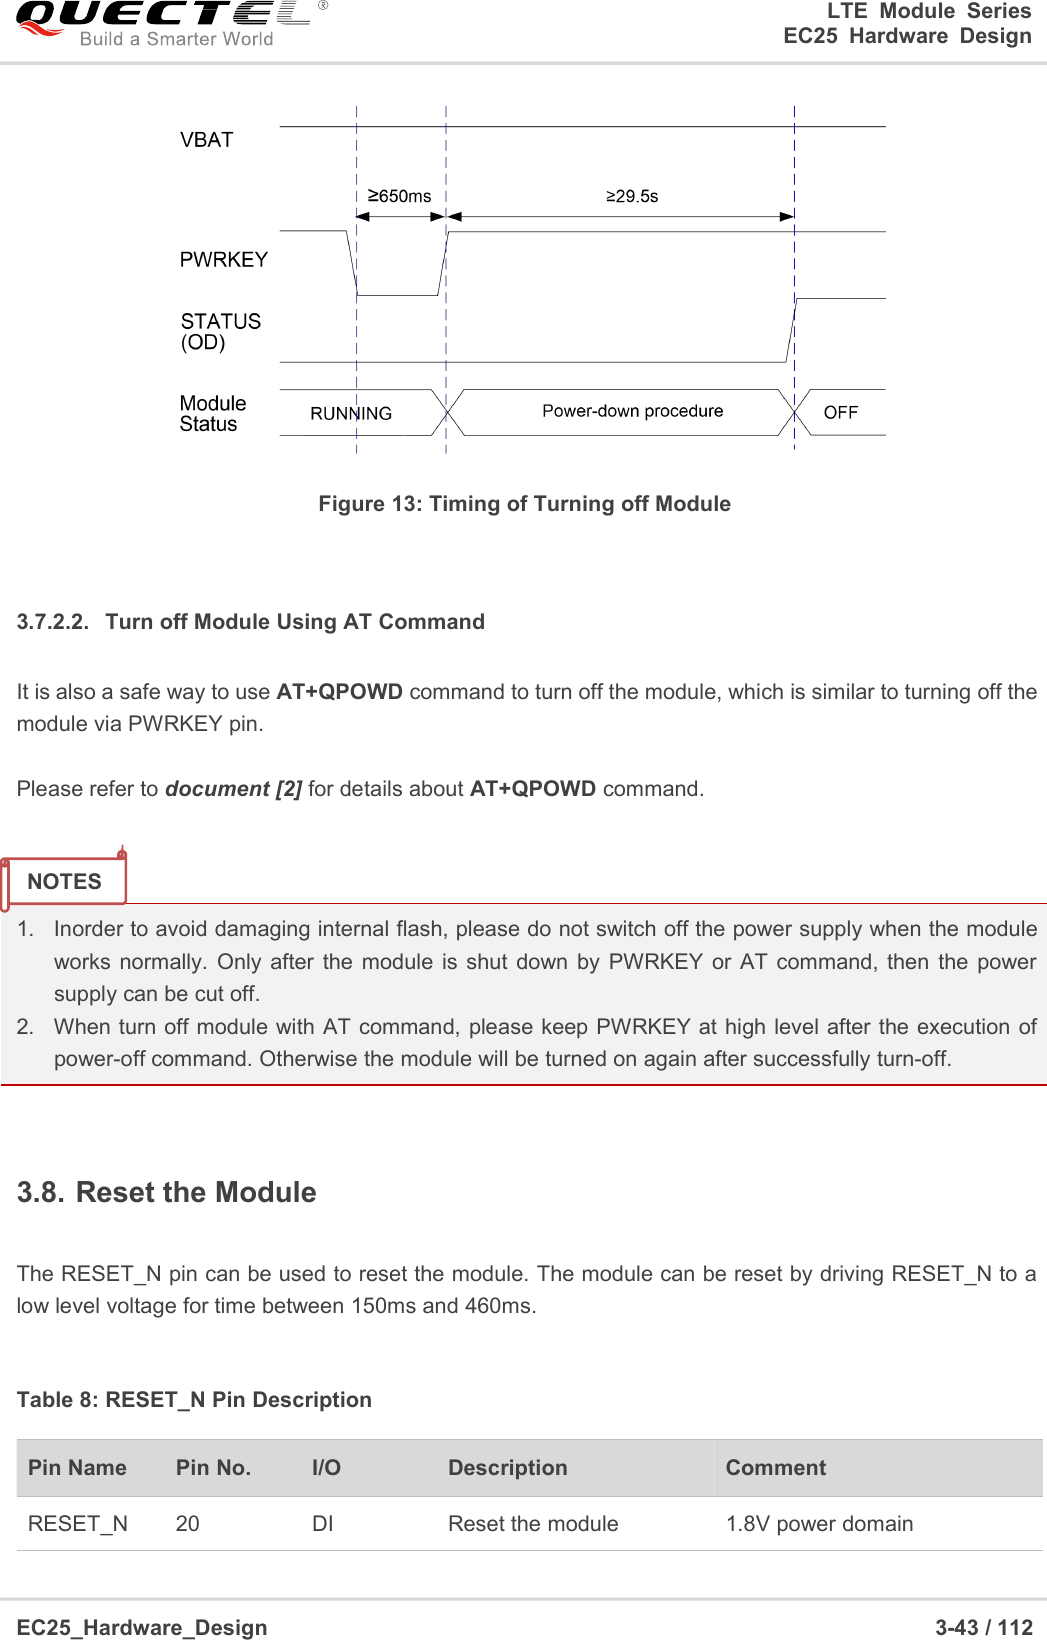 LTE Module SeriesEC25 Hardware DesignEC25_Hardware_Design 3-43 / 112Figure 13: Timing of Turning off Module3.7.2.2. Turn off Module Using AT CommandIt is also a safe way to use AT+QPOWD command to turn off the module, which is similar to turning off themodule via PWRKEY pin.Please refer to document [2] for details about AT+QPOWD command.1. Inorder to avoid damaging internal flash, please do not switch off the power supply when the moduleworks normally. Only after the module is shut down by PWRKEY or AT command, then the powersupply can be cut off.2. When turn off module with AT command, please keep PWRKEY at high level after the execution ofpower-off command. Otherwise the module will be turned on again after successfully turn-off.3.8. Reset the ModuleThe RESET_N pin can be used to reset the module. The module can be reset by driving RESET_N to alow level voltage for time between 150ms and 460ms.Table 8: RESET_N Pin DescriptionPin NamePin No.I/ODescriptionCommentRESET_N20DIReset the module1.8V power domainNOTES